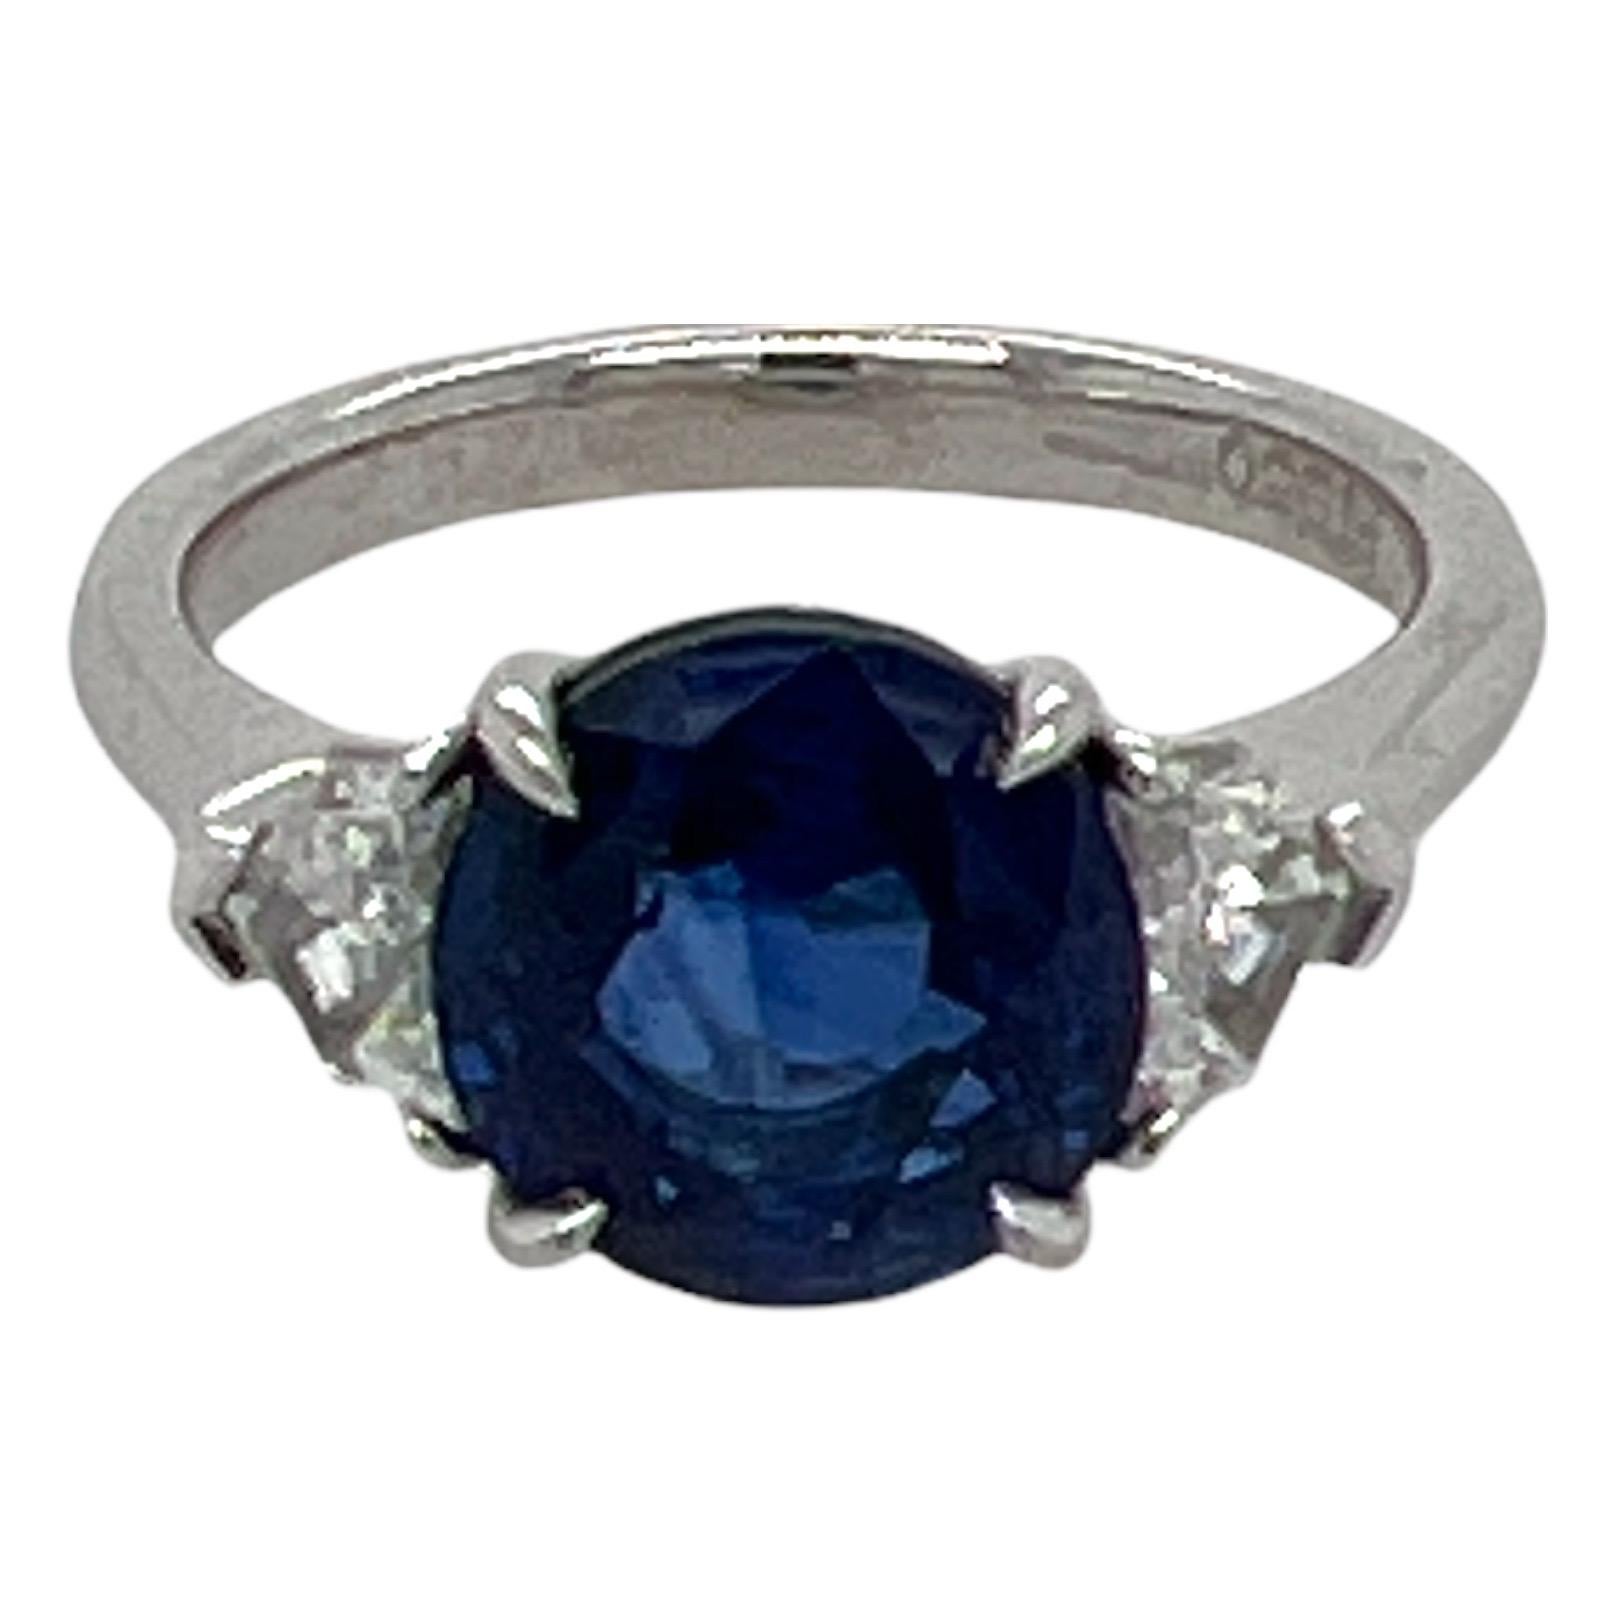 Stunning Ceylon blue sapphire diamond ring handcrafted in platinum. The ring features a 3.60 carat round vibrant blue sapphire gemstone flanked by 2 shield cut diamonds. The two diamonds weigh .36 carat total weight and are graded F-G color and VS